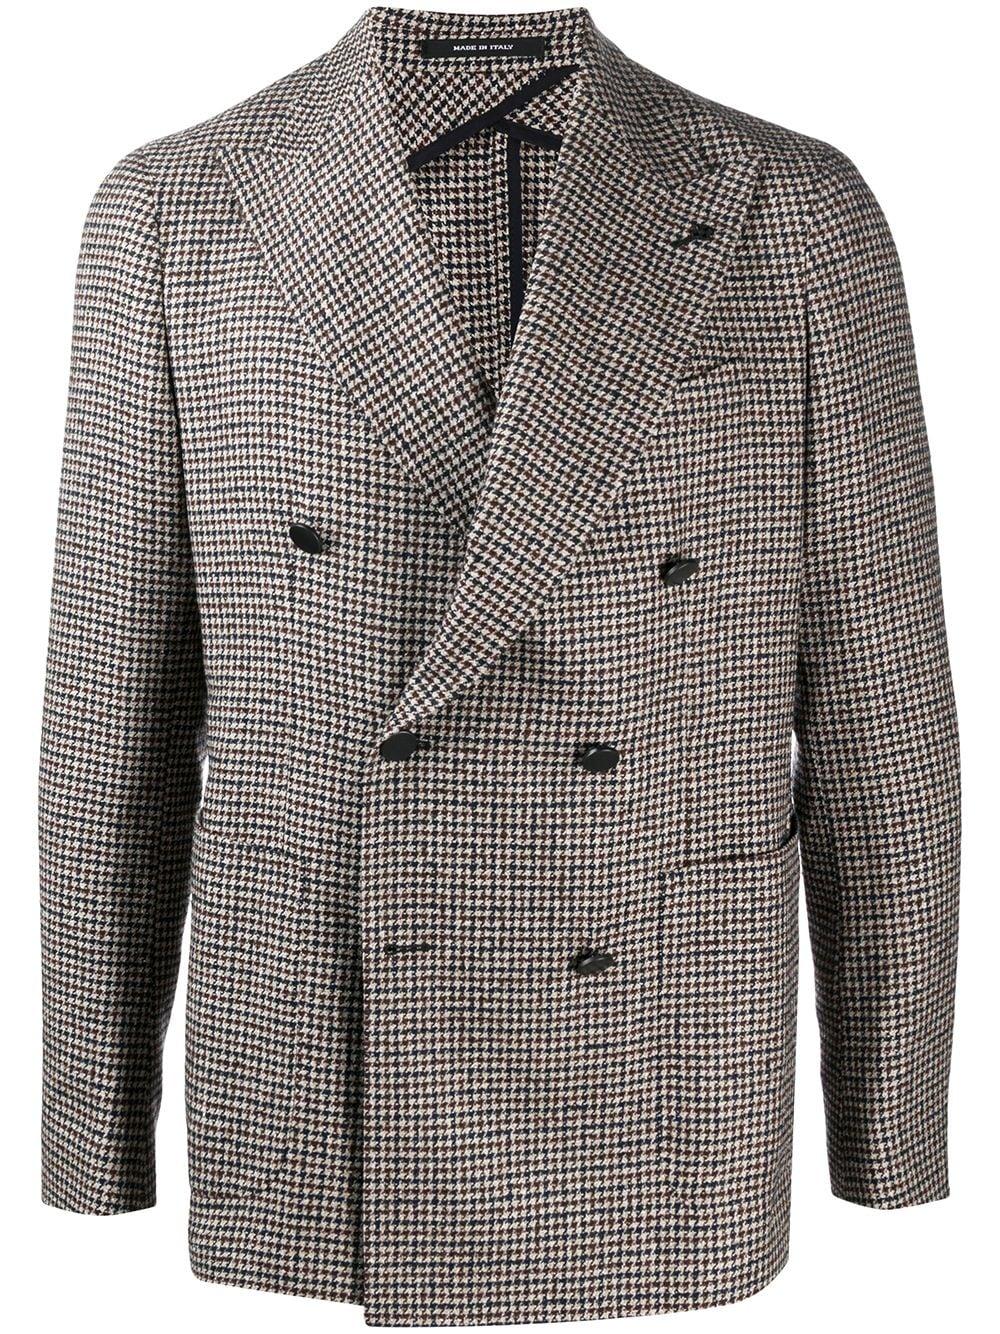 Tagliatore Wool Houndstooth Double-breasted Blazer in Gray for Men - Lyst